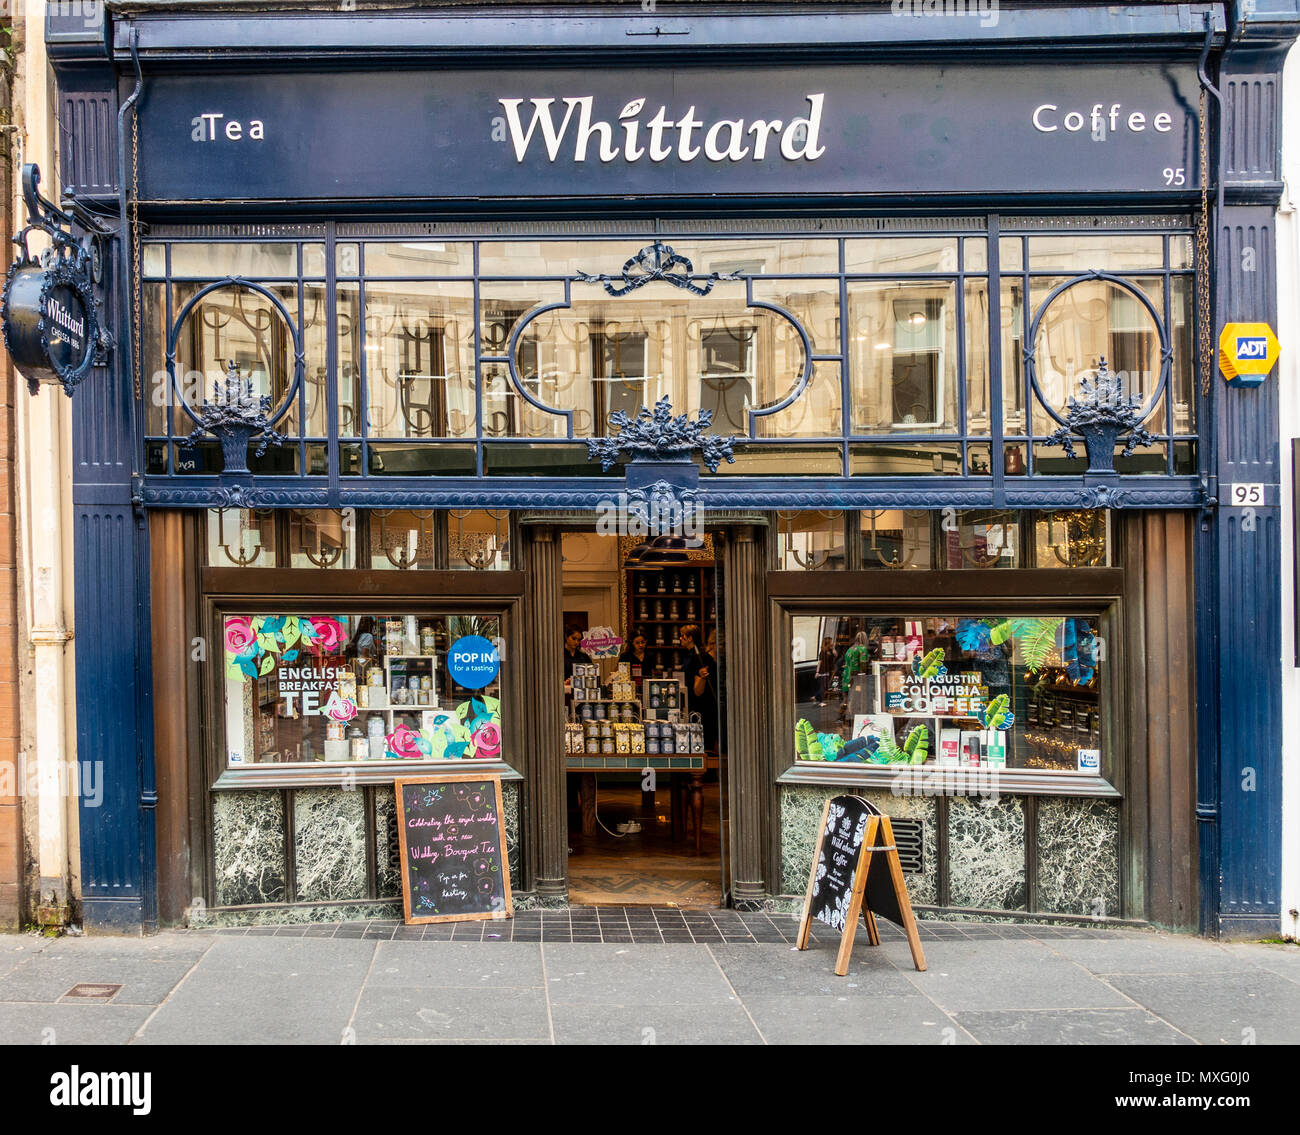 https://c8.alamy.com/comp/MXG0J0/whittard-of-chelsea-tea-and-coffee-seller-frontage-and-entrance-in-buchanan-street-central-glasgow-scotland-uk-MXG0J0.jpg